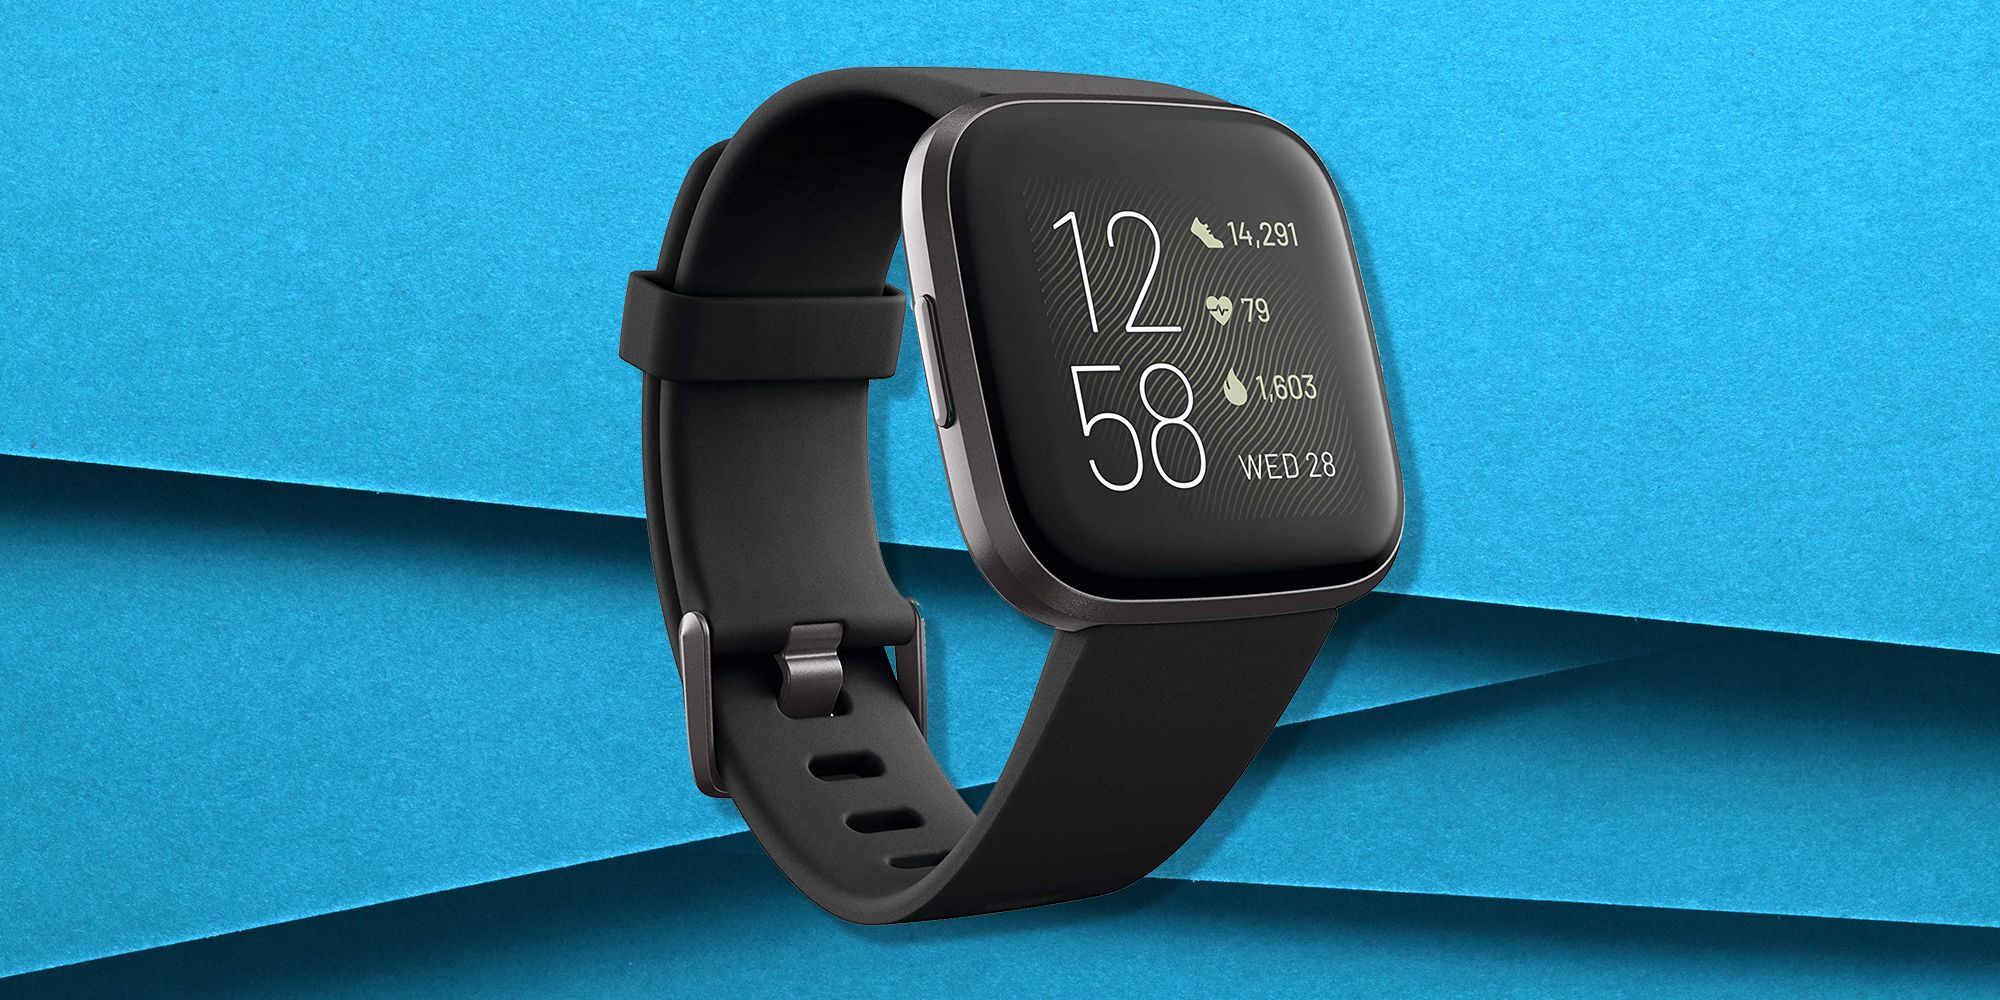 spids newness sværd The New FitBit Versa 2 Is Back On Sale At Its Black Friday Price